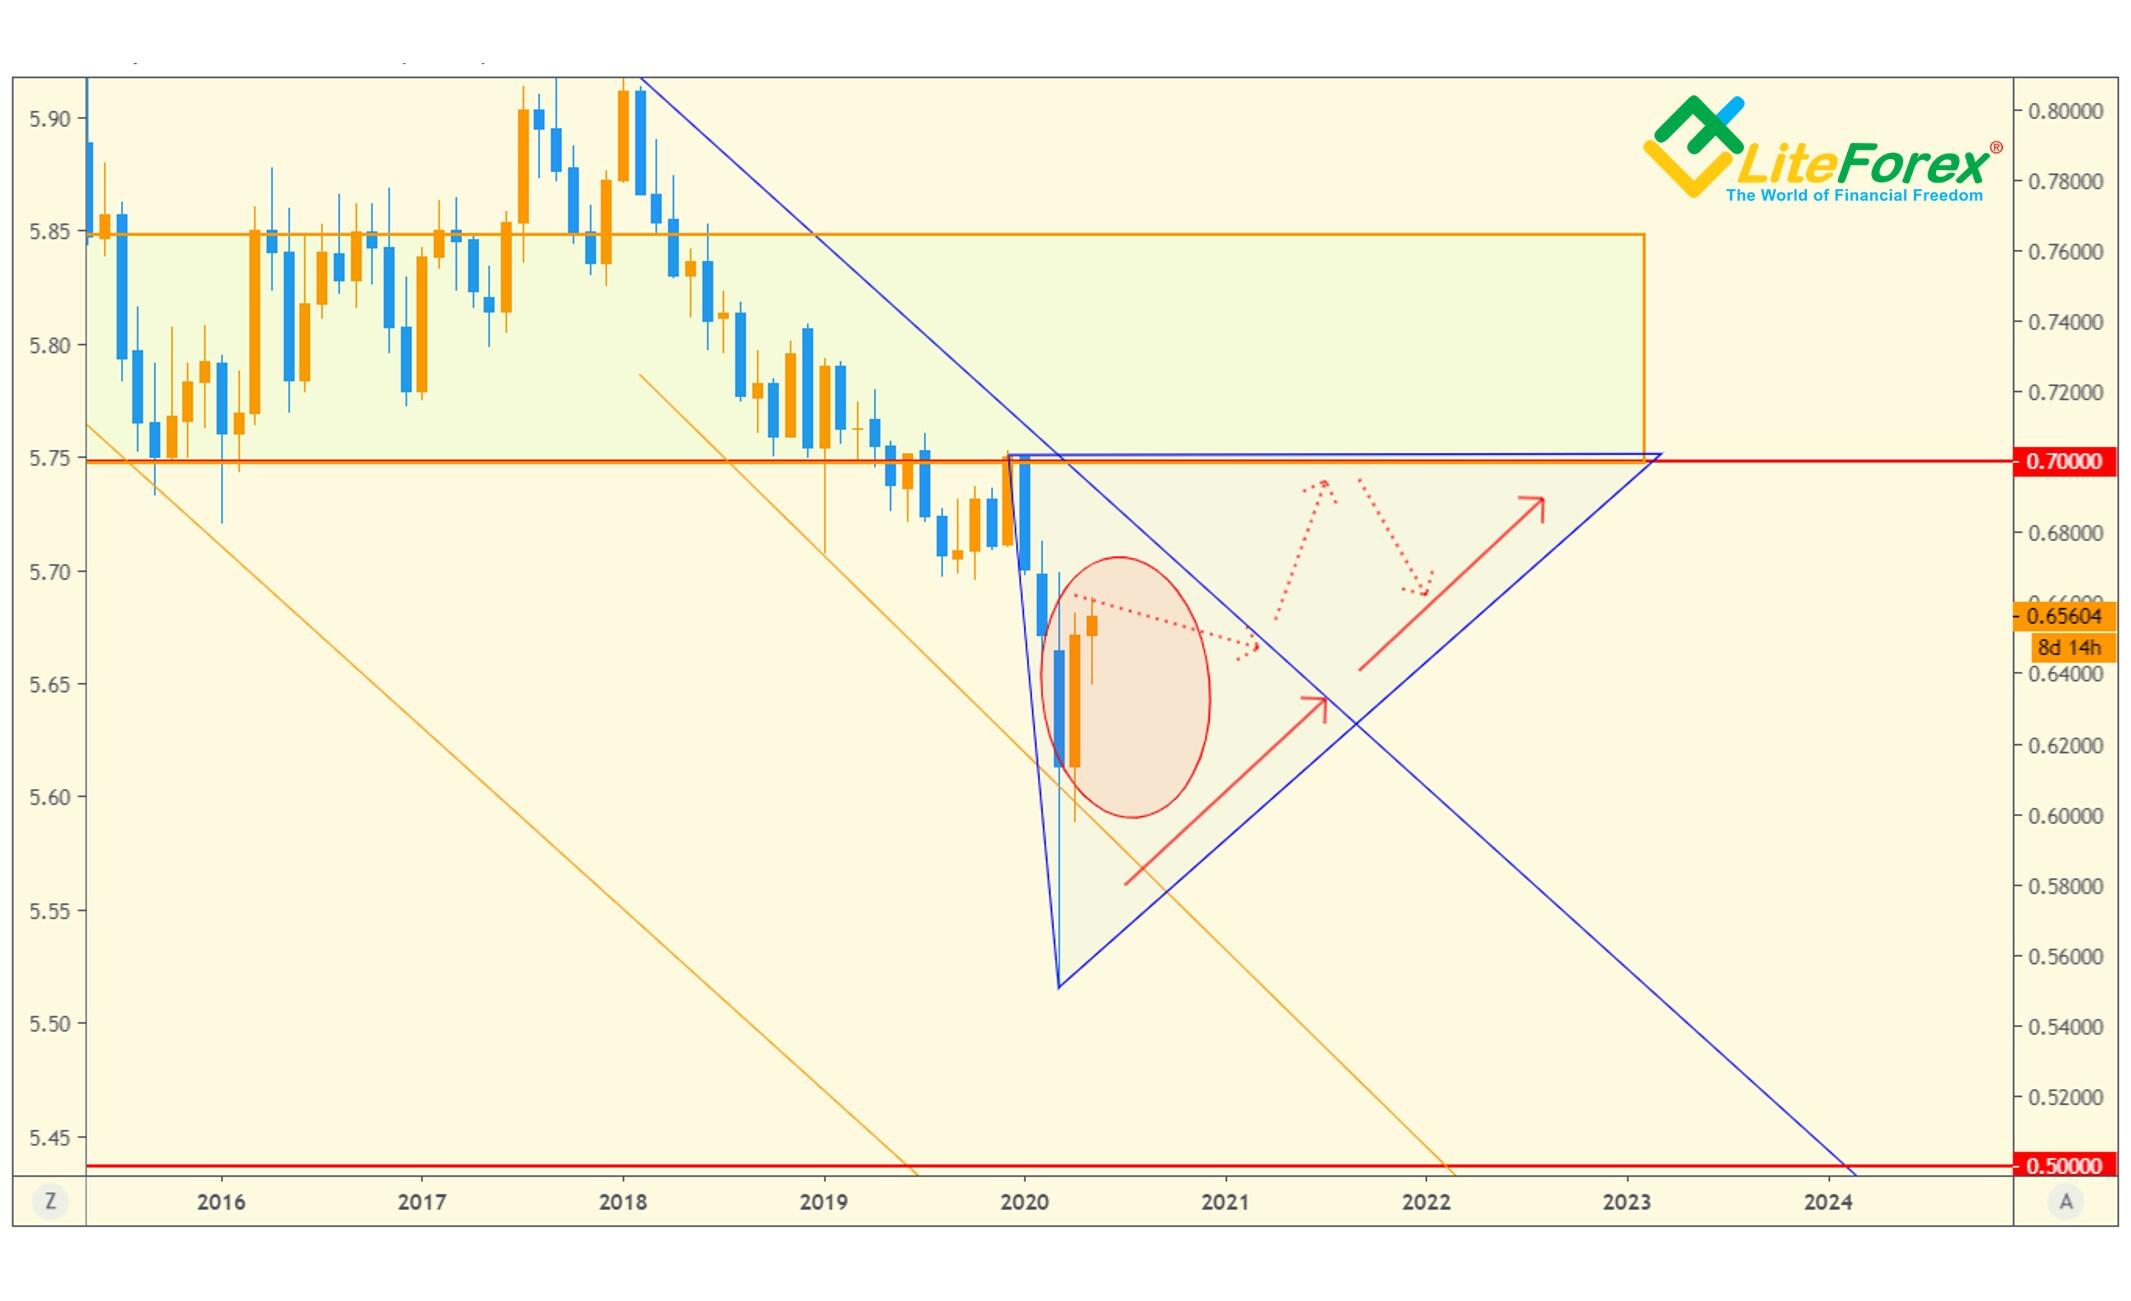 AUDUSD Forecast – Australian Dollar Continues to Find Support